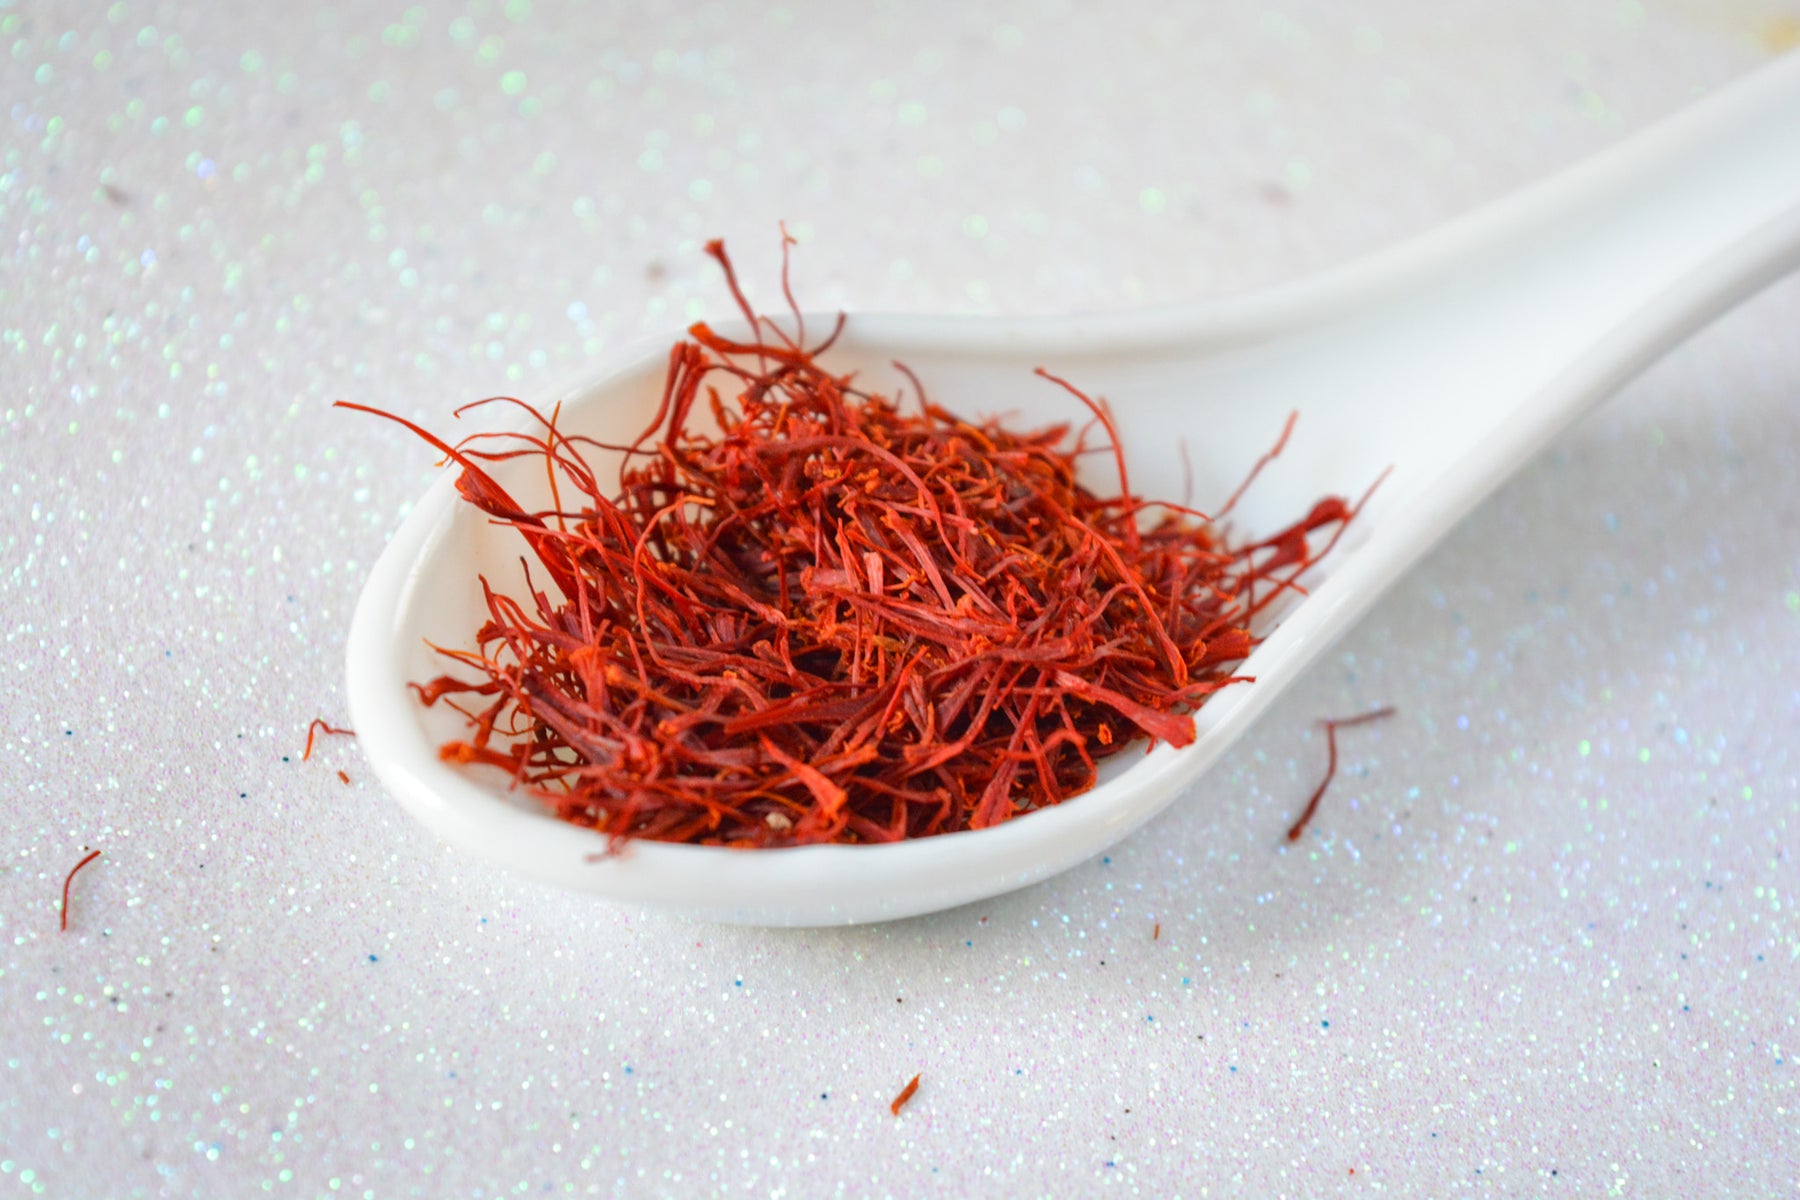 Saffron, the world’s most expensive spice and a powerful antioxidant